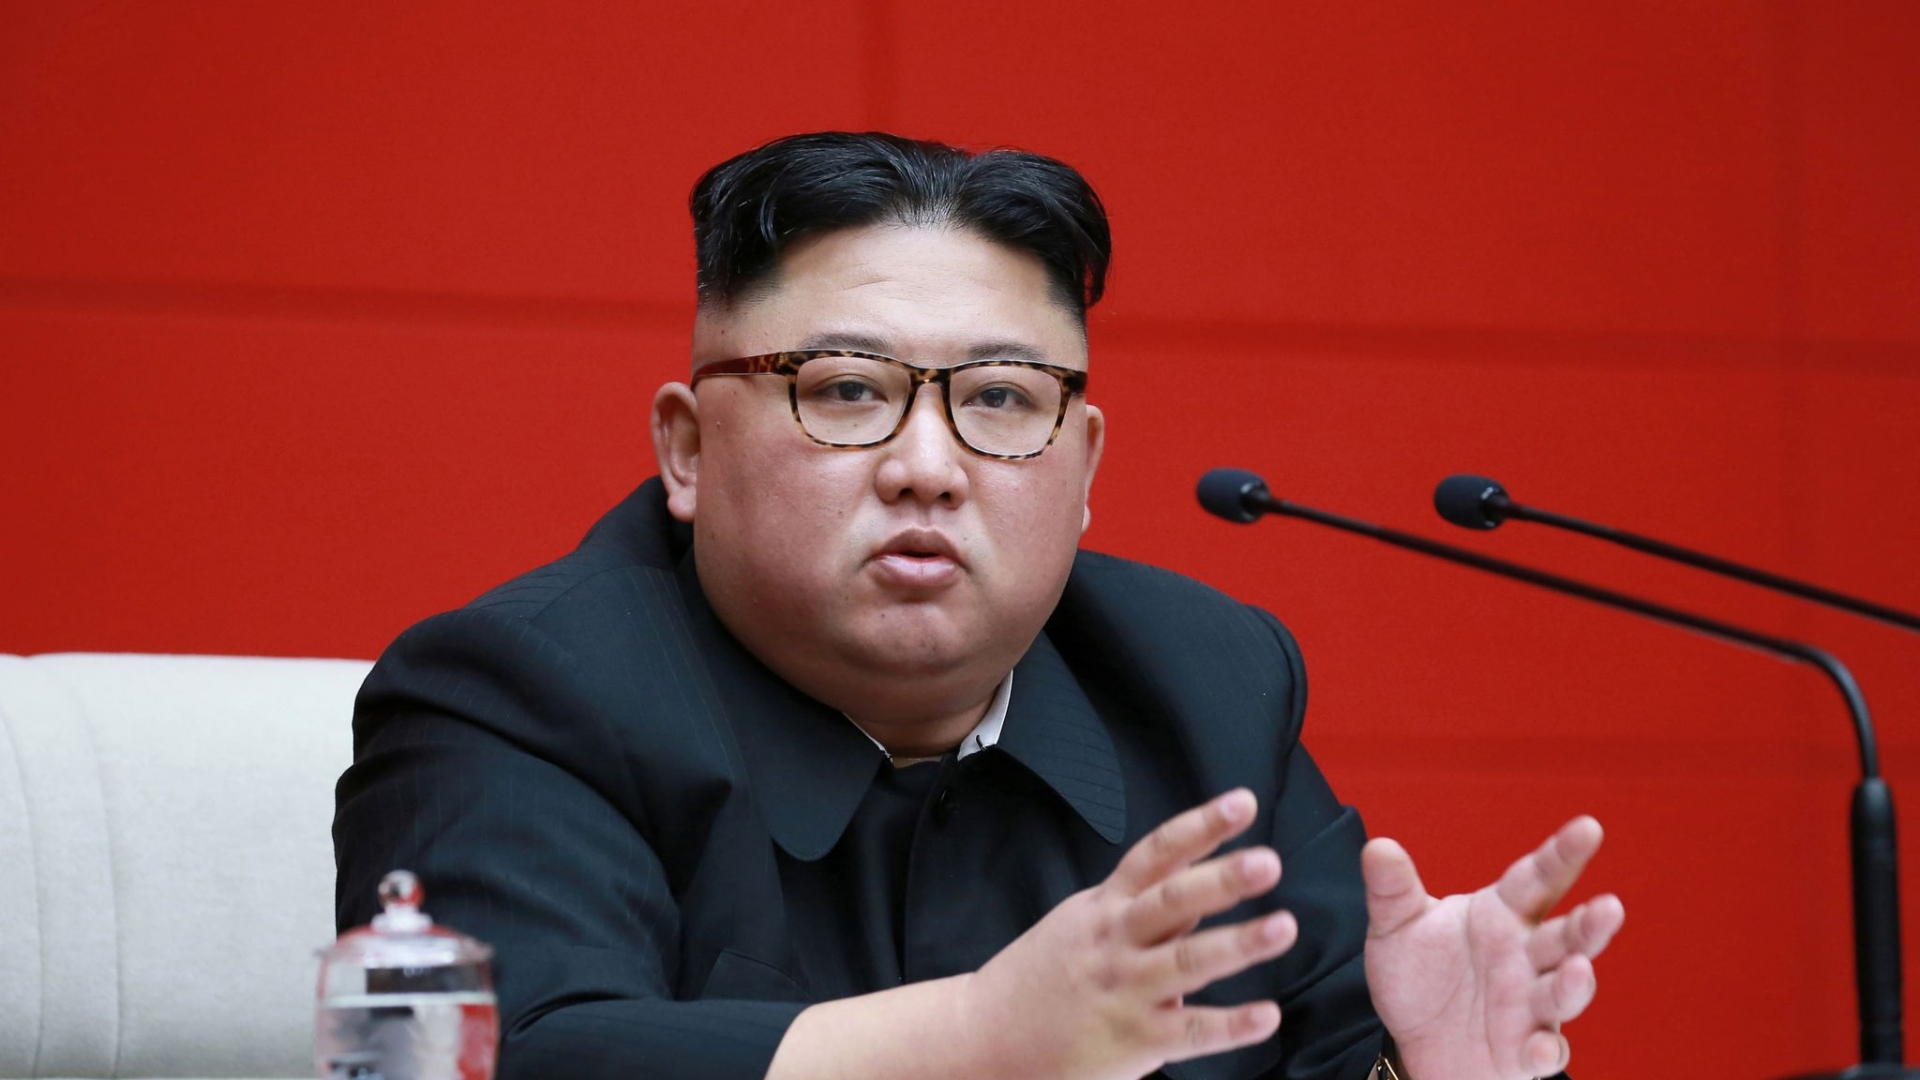 north korean leader kim jong un stayed out of public